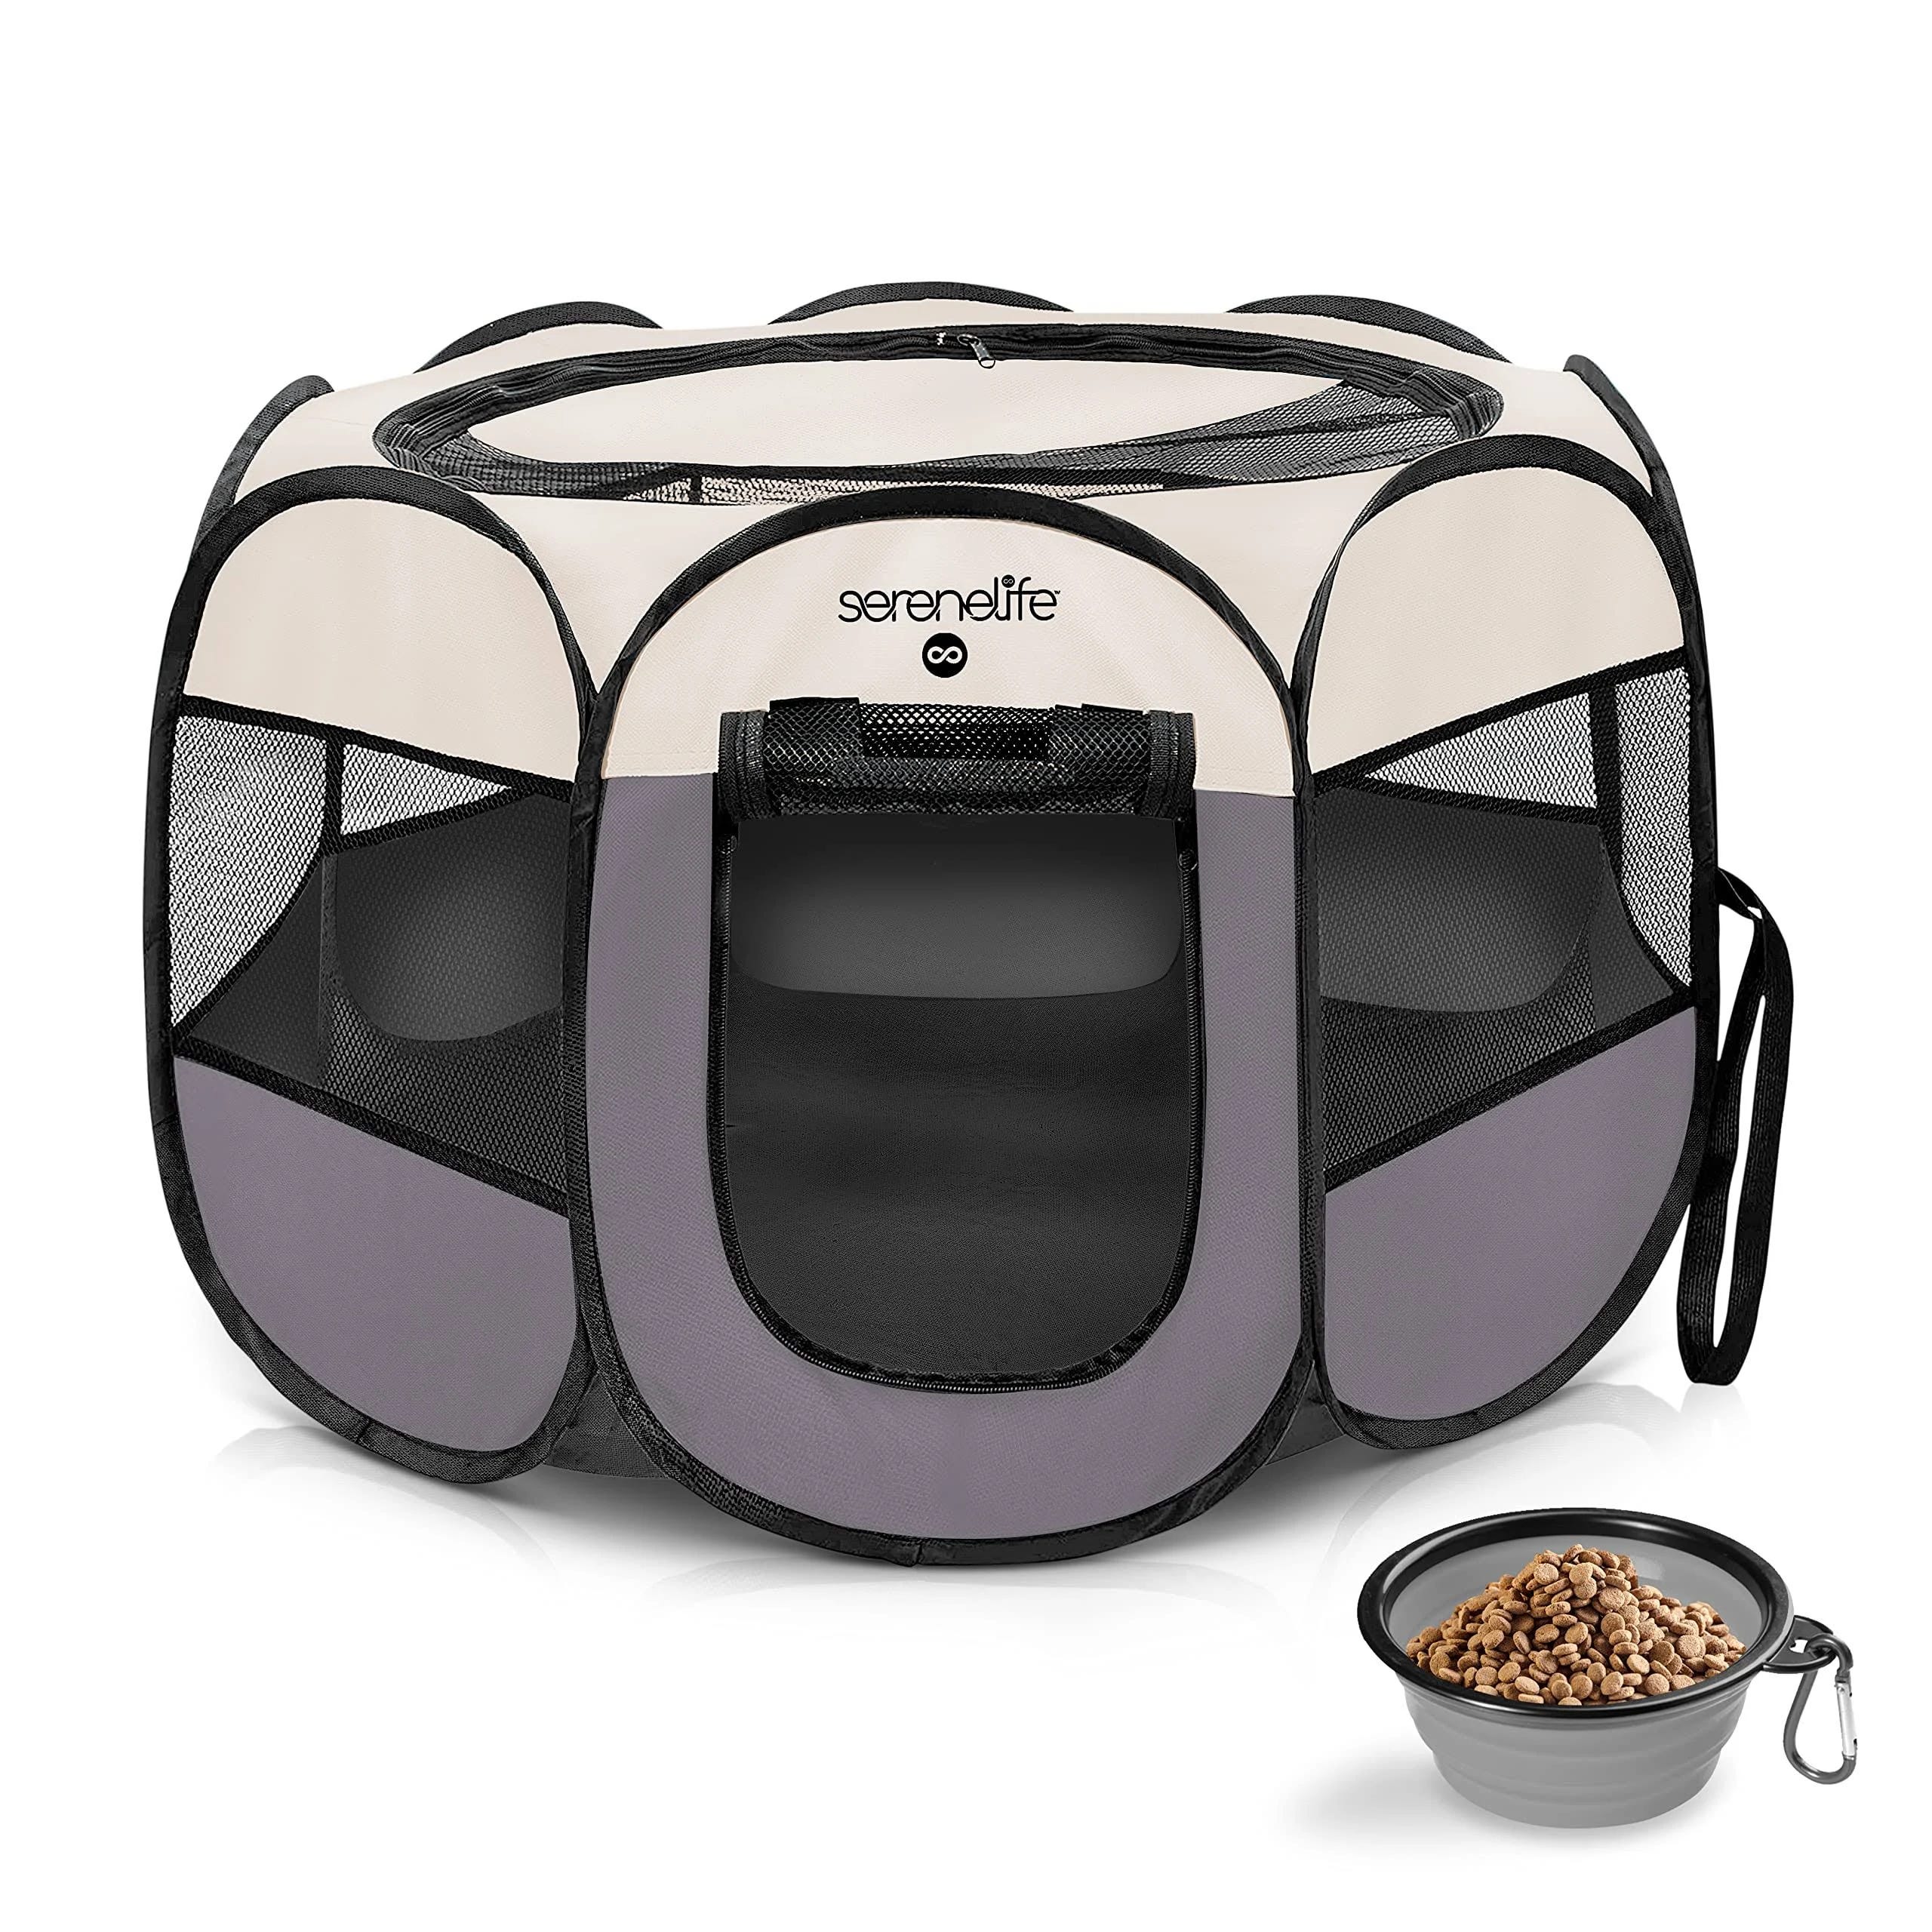 Pet-Friendly Collapsible Playpen with Removable Zippered Top | Image